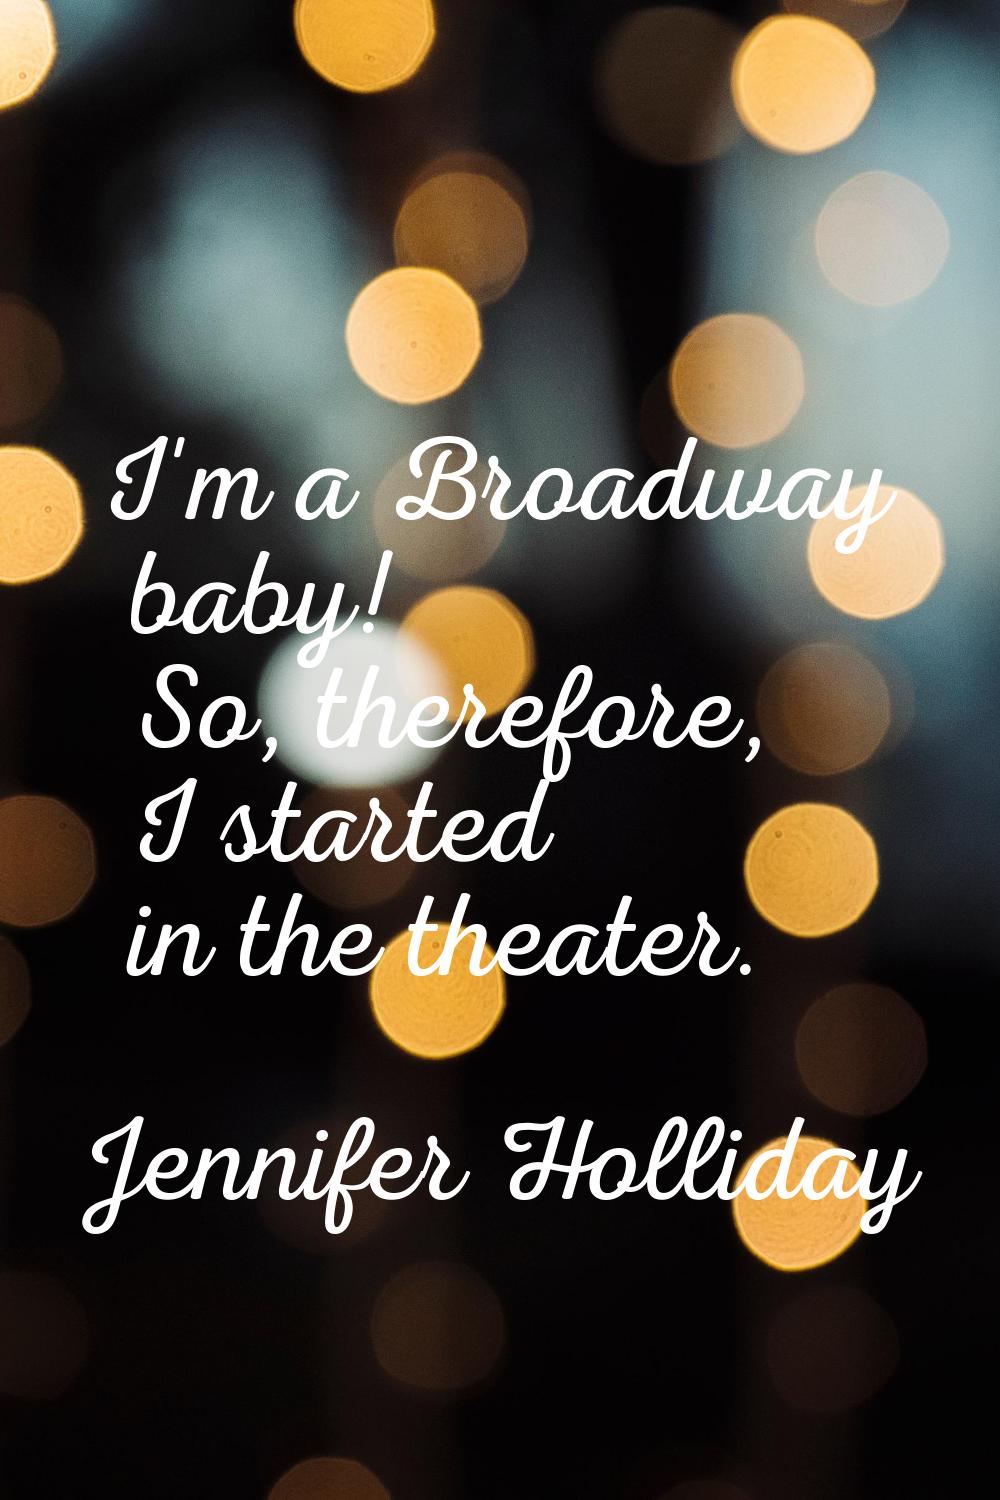 I'm a Broadway baby! So, therefore, I started in the theater.